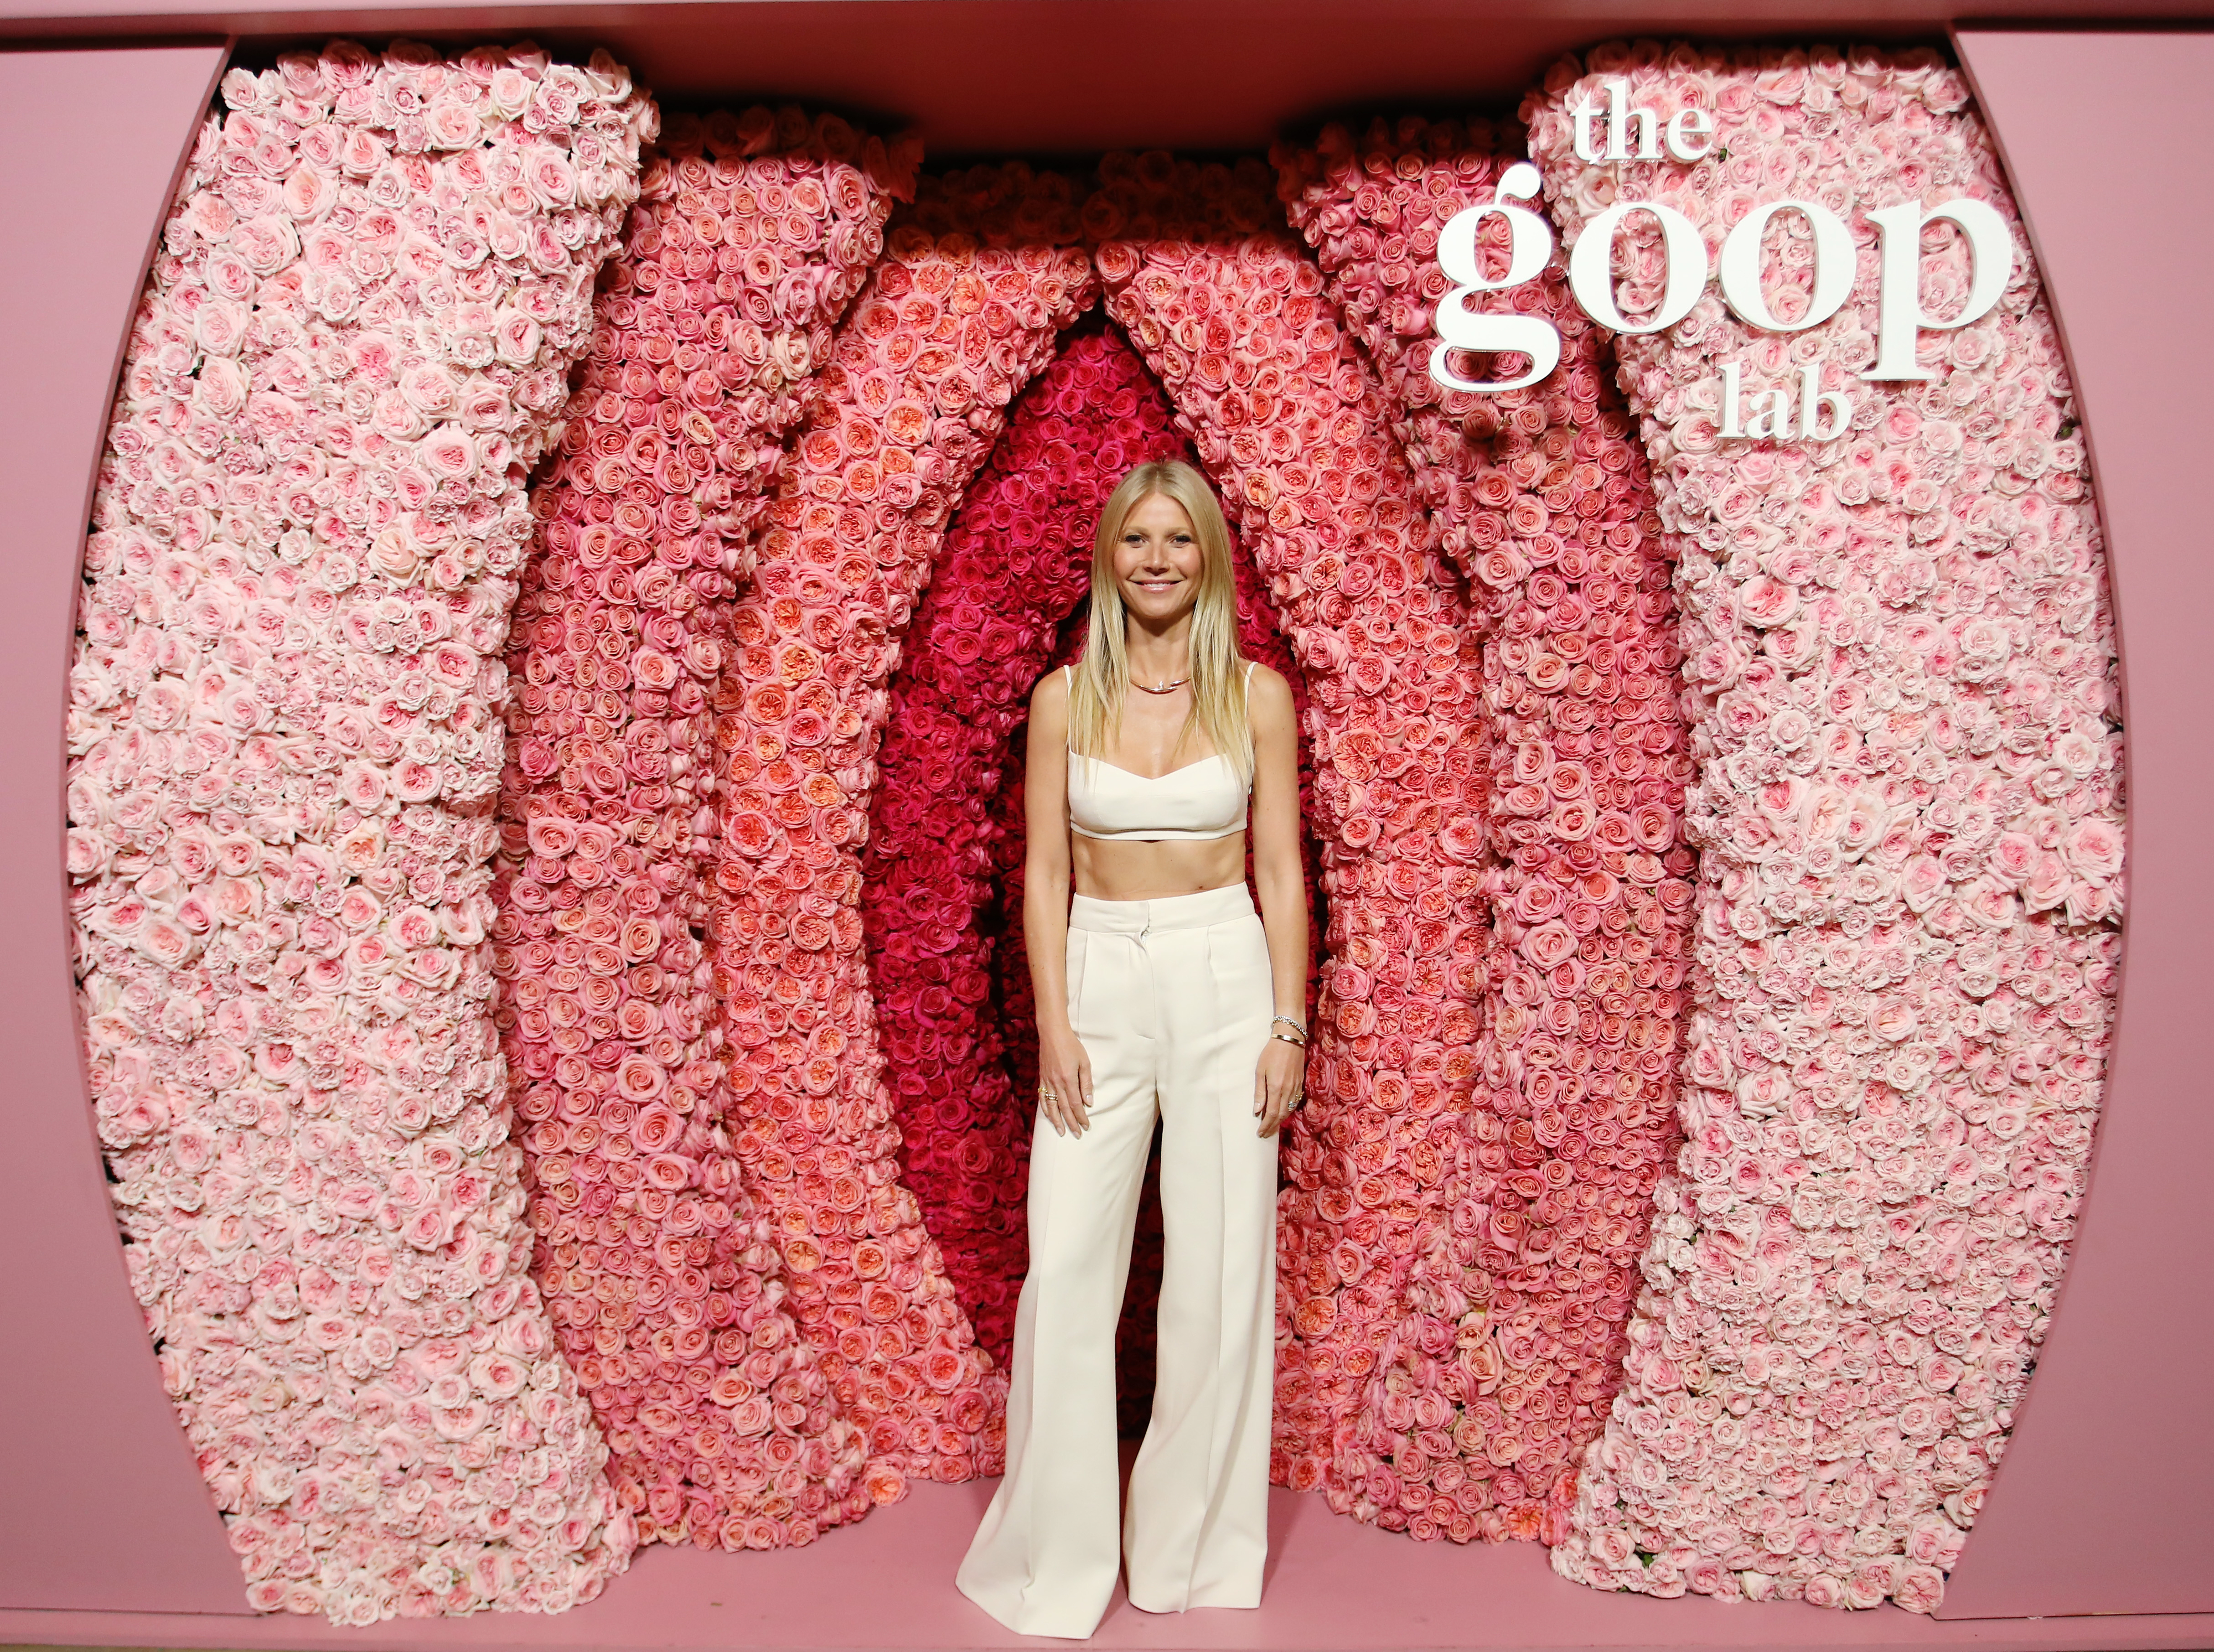 Gwyneth standing in front of &quot;the Goop Lab&quot; vagina-themed design